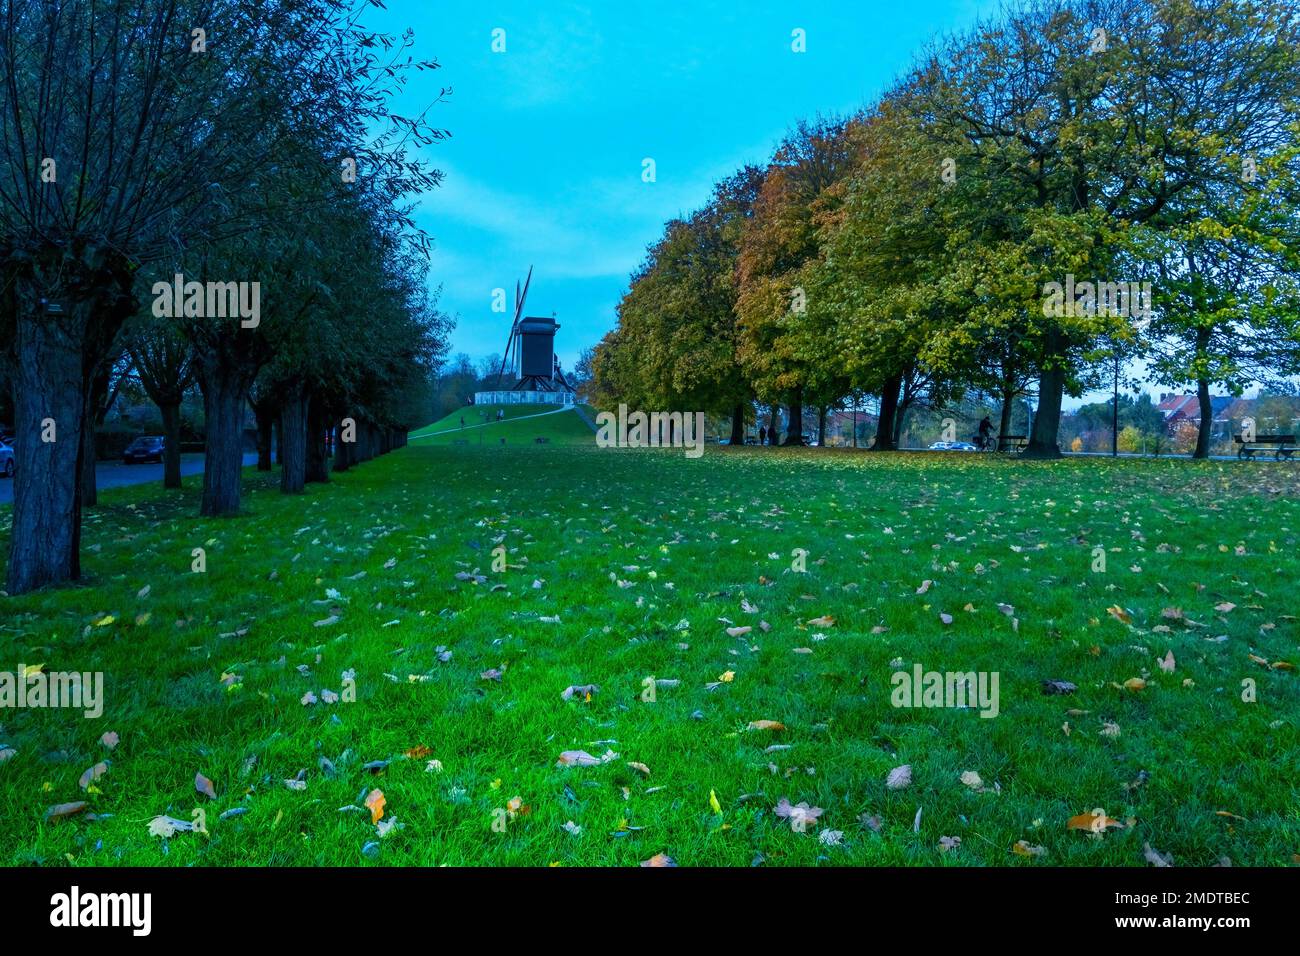 The 18th century Sint-Janshuismolen windmill along the canal that encircles the medieval city of Bruges Belgium. November 2022 Stock Photo